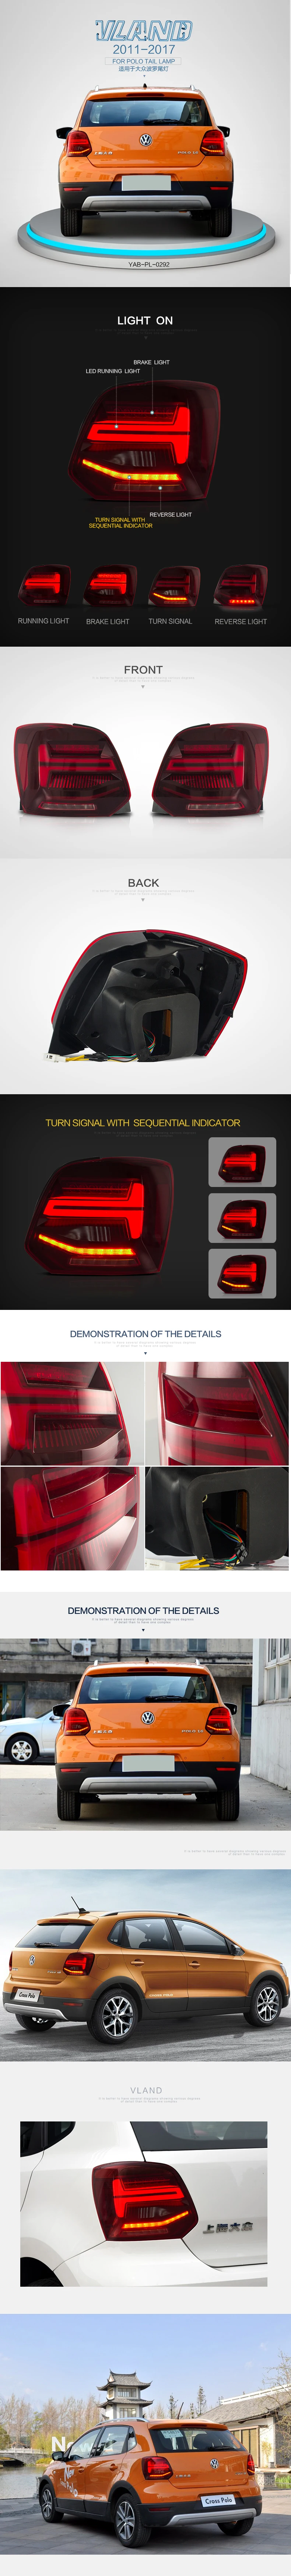 VLAND manufacturer car taillight for Polo tail light 2011-2018 for Polo LED  back lamp and Vento rear light 2015-2018 in China